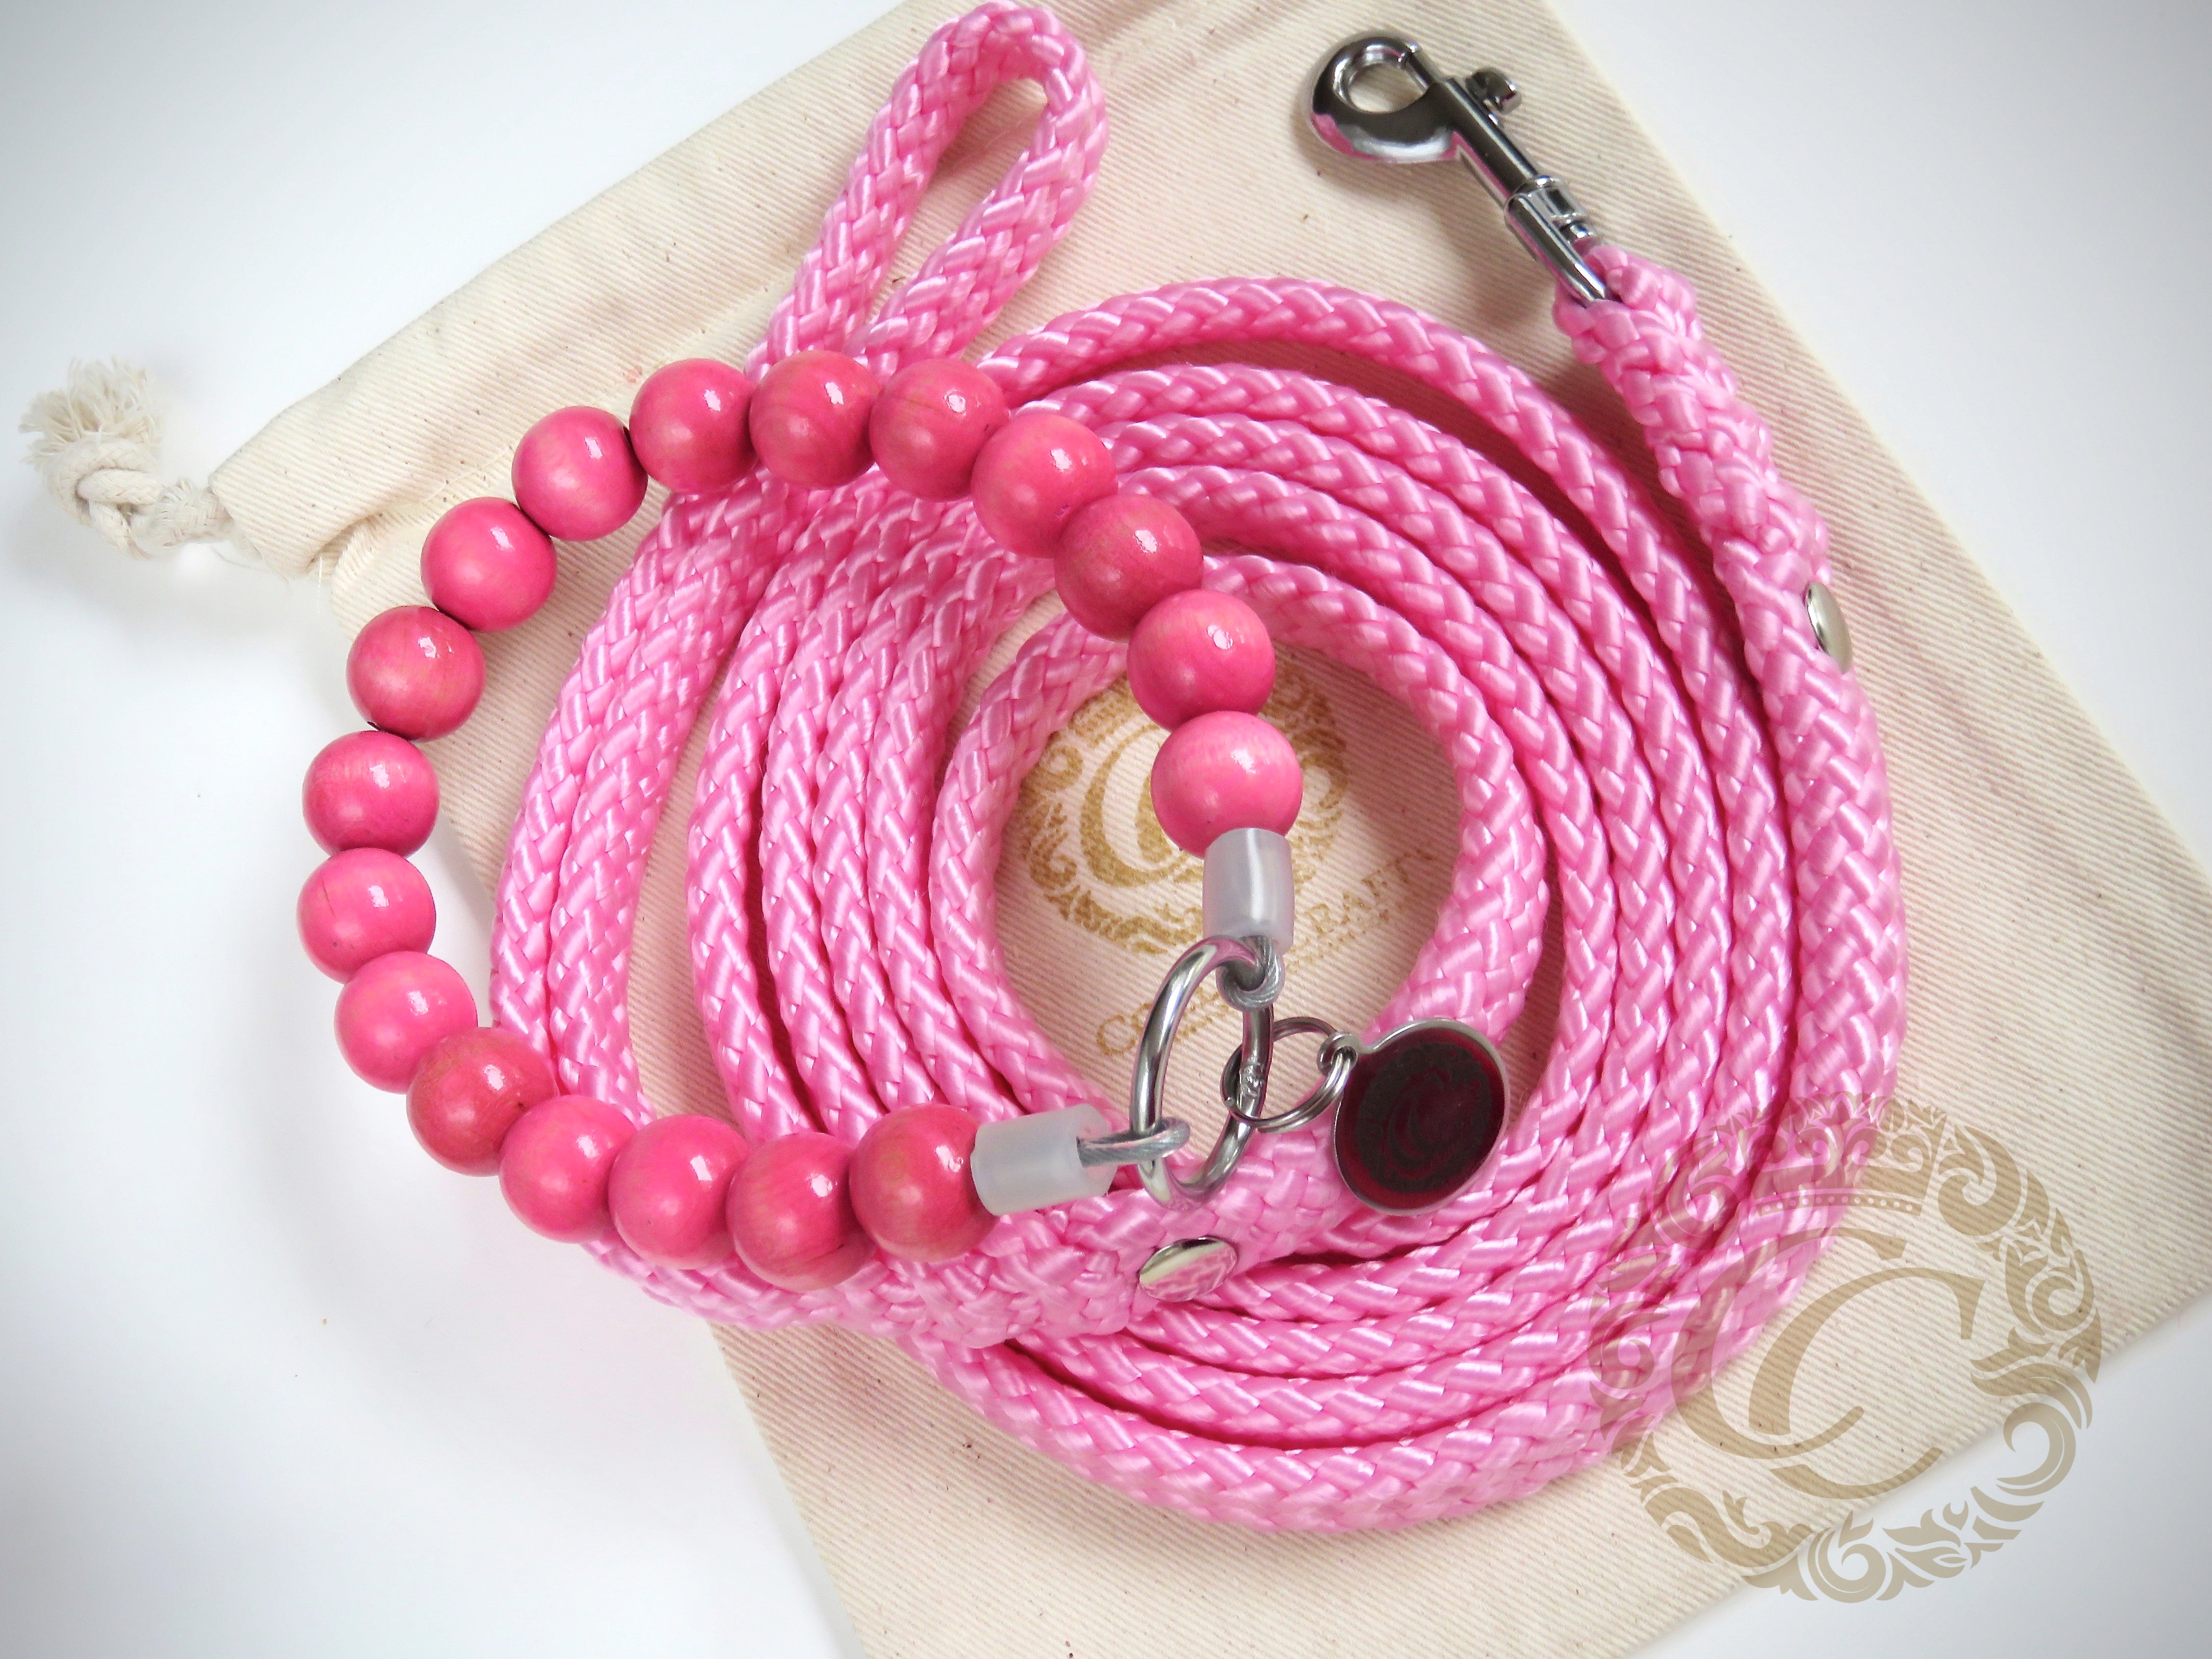 Dog collar Candy Pink | Dog Collars | Bead dog Collars | CollarCrafts | dogcollar | collar | Luxury dog collars  | Unbreakable dog necklaces | bead dog collars | Girly dog collars | Handmade dog collar s| beaded dog collars | wooden bead dog collars | alu max com dog collars | beaded collars for dogs | Pink beads dog collars and leashes